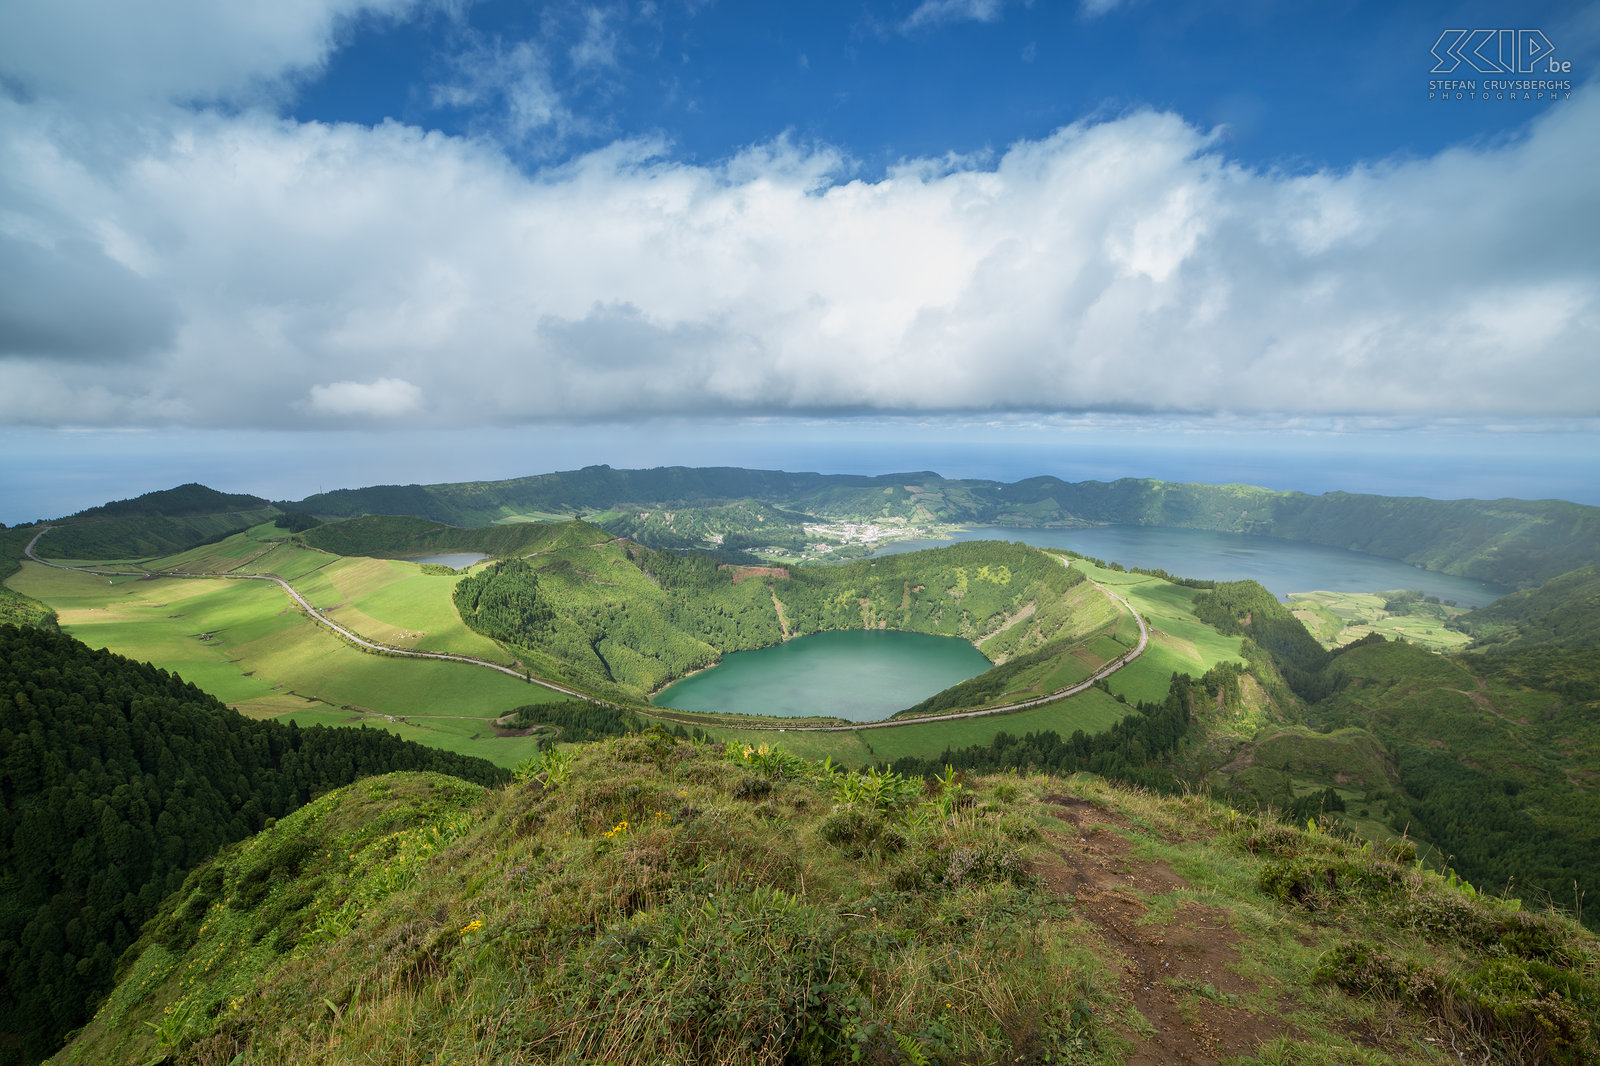 Sete Cidades - Miradouro da Boca do Inferno The most famous viewpoint over the crater lakes of Sete Cidades is Miradouro da Boca do Inferno. At the back are Lagoa Azul (Blue Lake) and the Lagua Verde (Green Lake). The higher-lying crater lake is Lagoa de Santiago. The crater was caused by a massive eruption that took place around 1440. Sailors who sailed along São Miguel before the colonization, claimed that there was a high mountain on each side. A few years later, with the arrival of the Portuguese, the peak of the western part disappeared. Stefan Cruysberghs